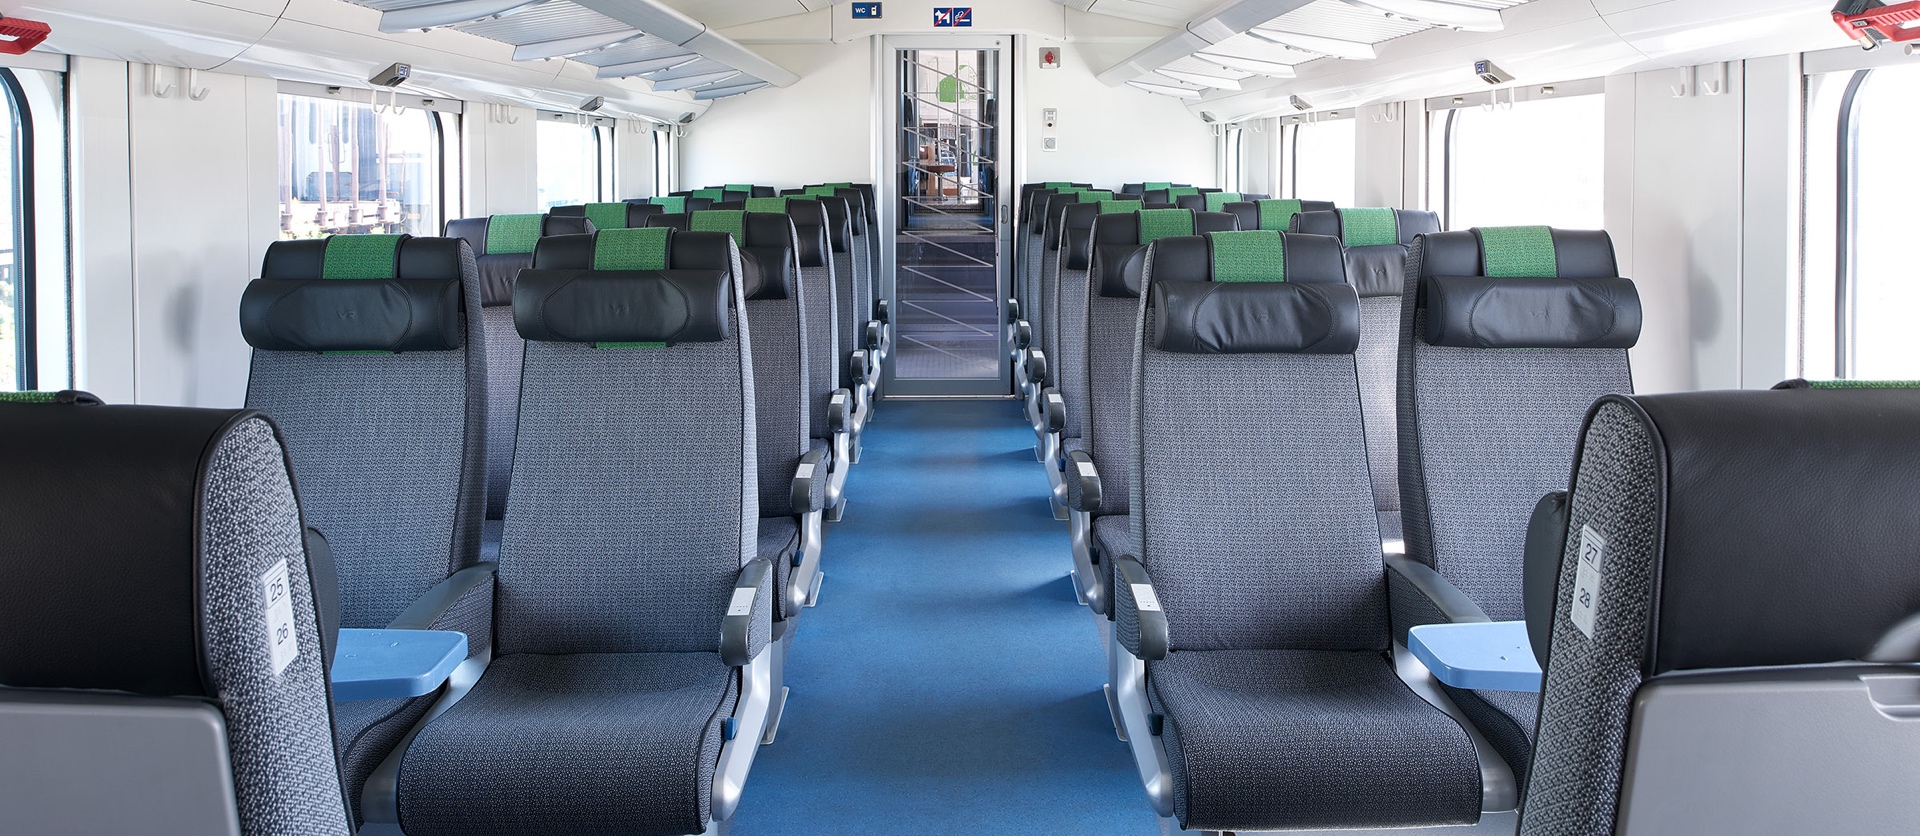 On board InterCity trains, there are two adjacent seats on both sides of the centre aisle. The trains also have seating with tables for four people.